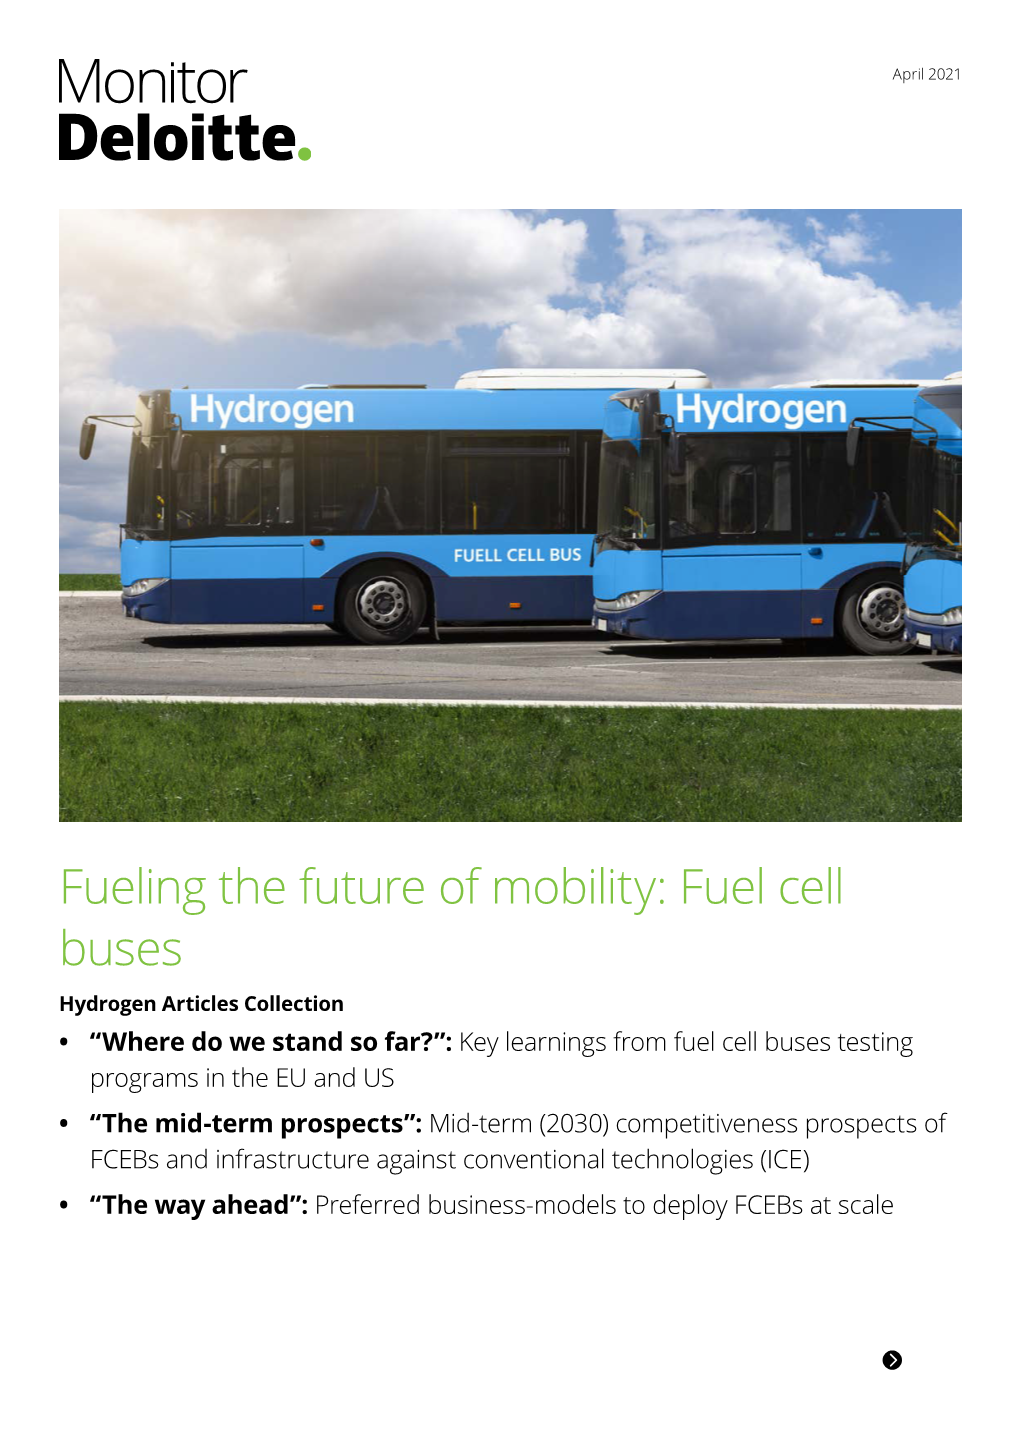 Fueling the Future of Mobility: Fuel Cell Buses